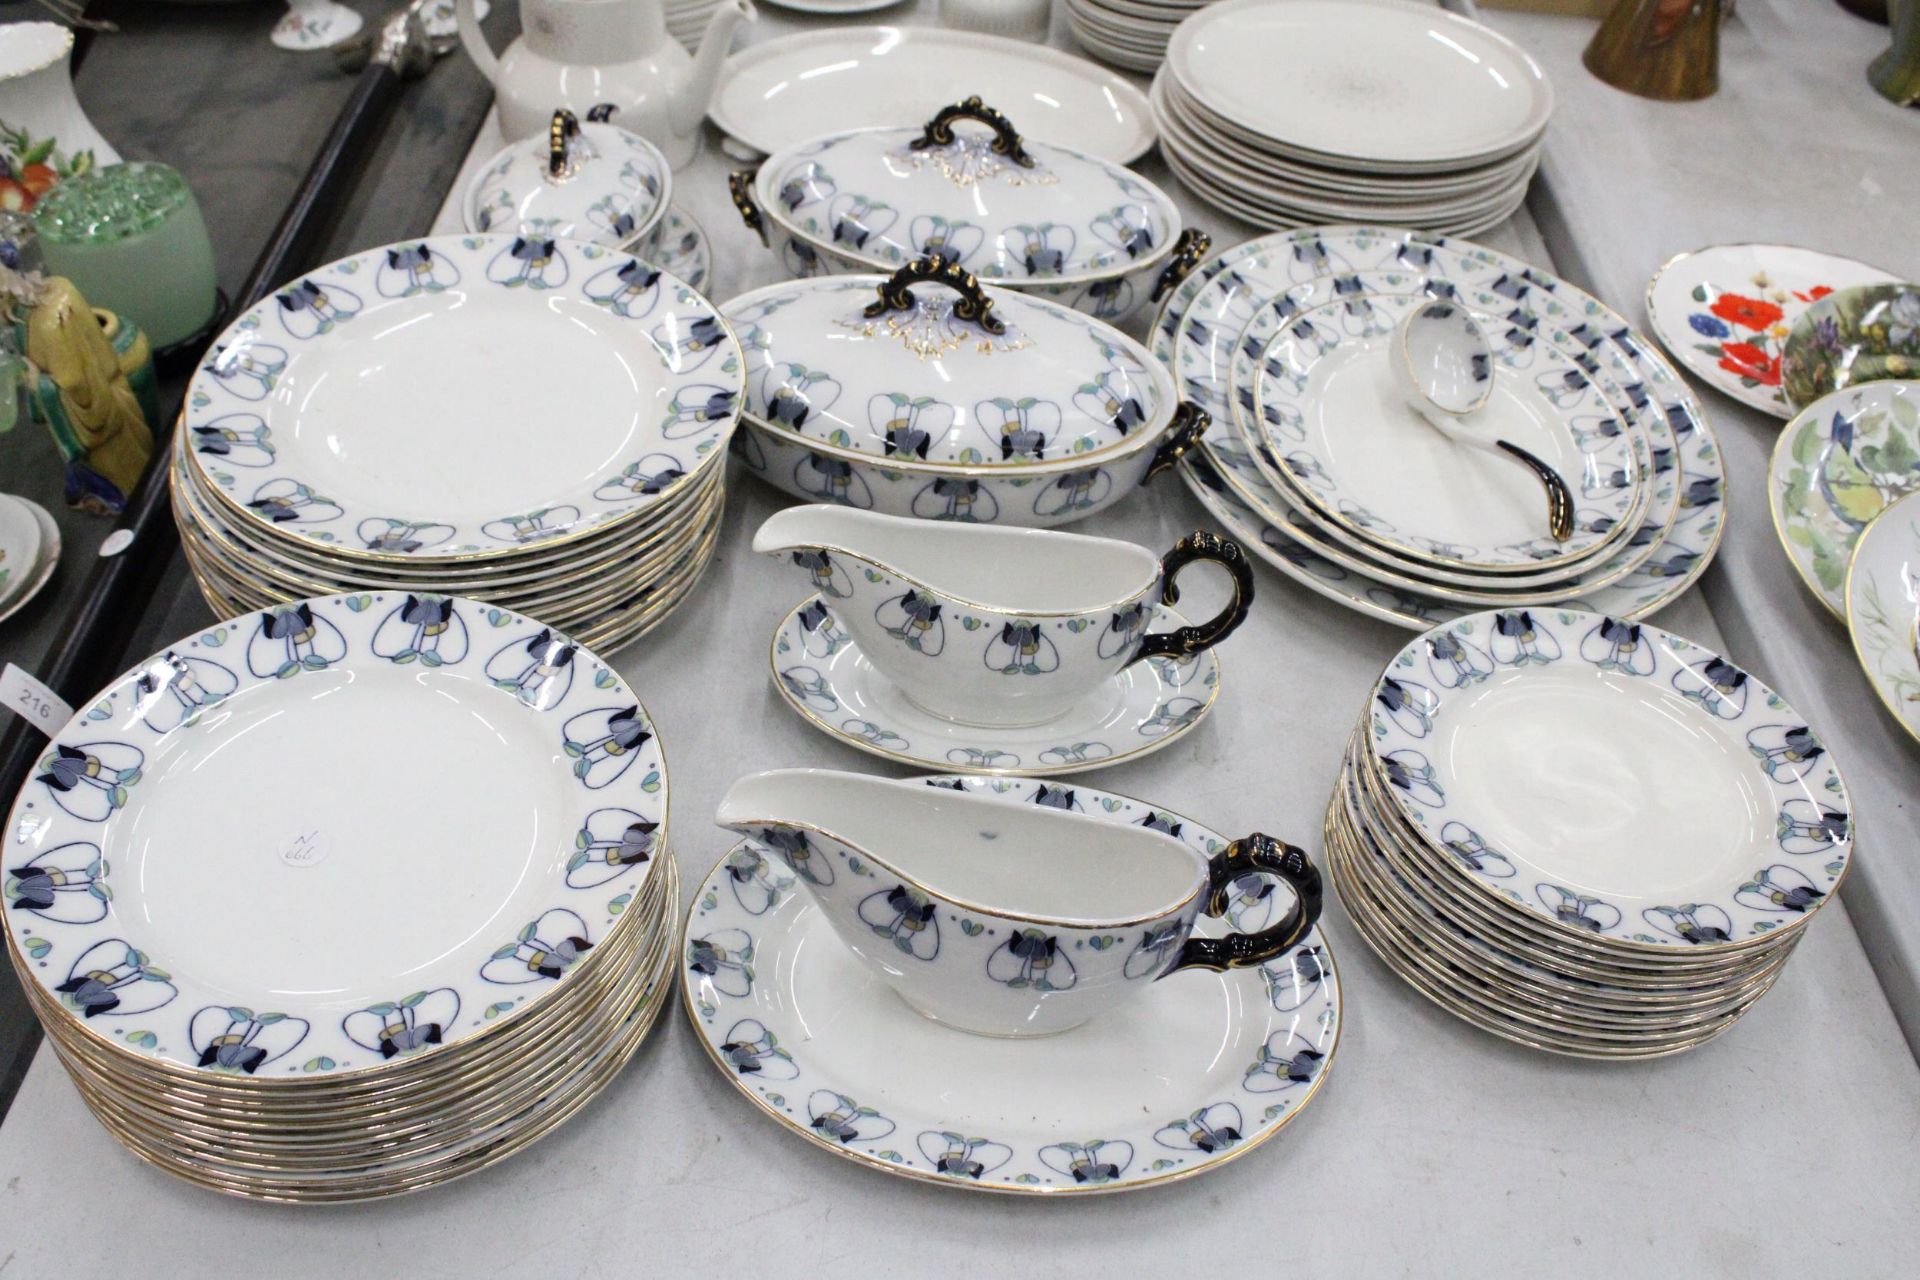 A LOSOL WARE 'TULIP' PART DINNER SERVICE TO INCLUDE, VARIOUS SIZES OF PLATES, LIDDED SERVING